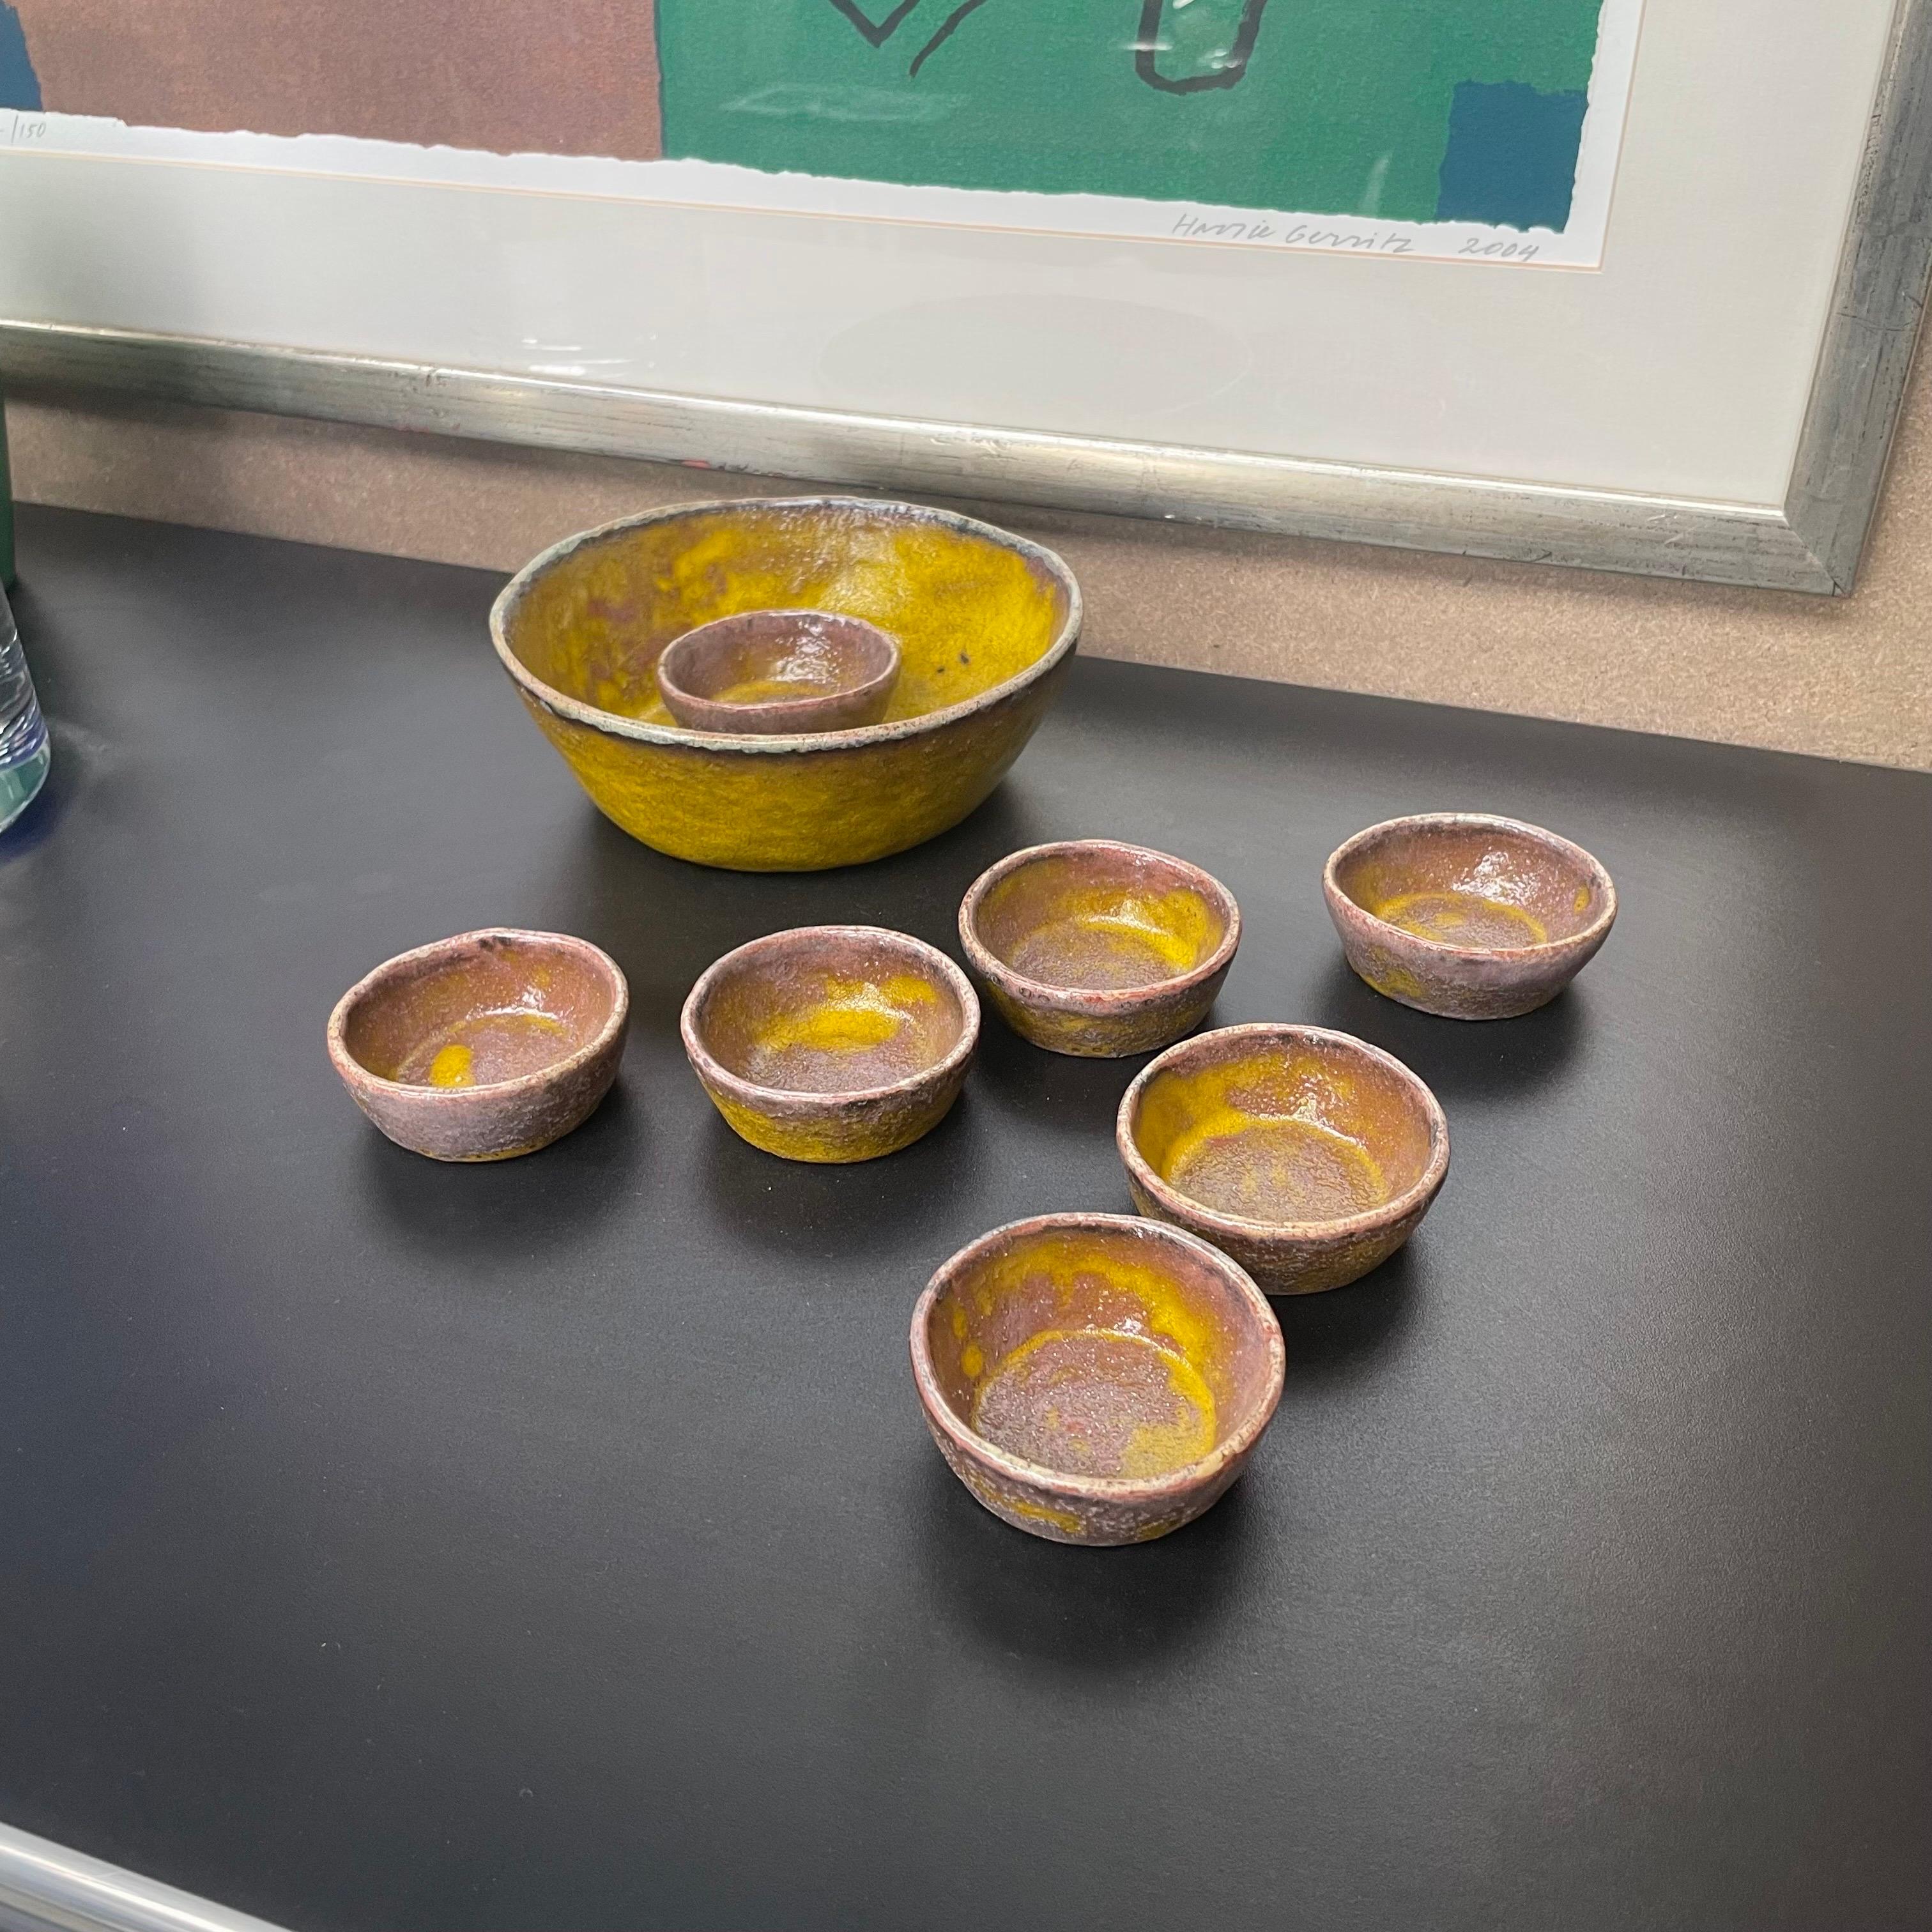 Mid Century Colorful Set of Pottery Bowls.

At DEZAAK DELUXE we try to find items that are out of the ordinary. With experience over 40 years, we are known for our singular eye and combining the new and the old. We have a few thousand items in stock